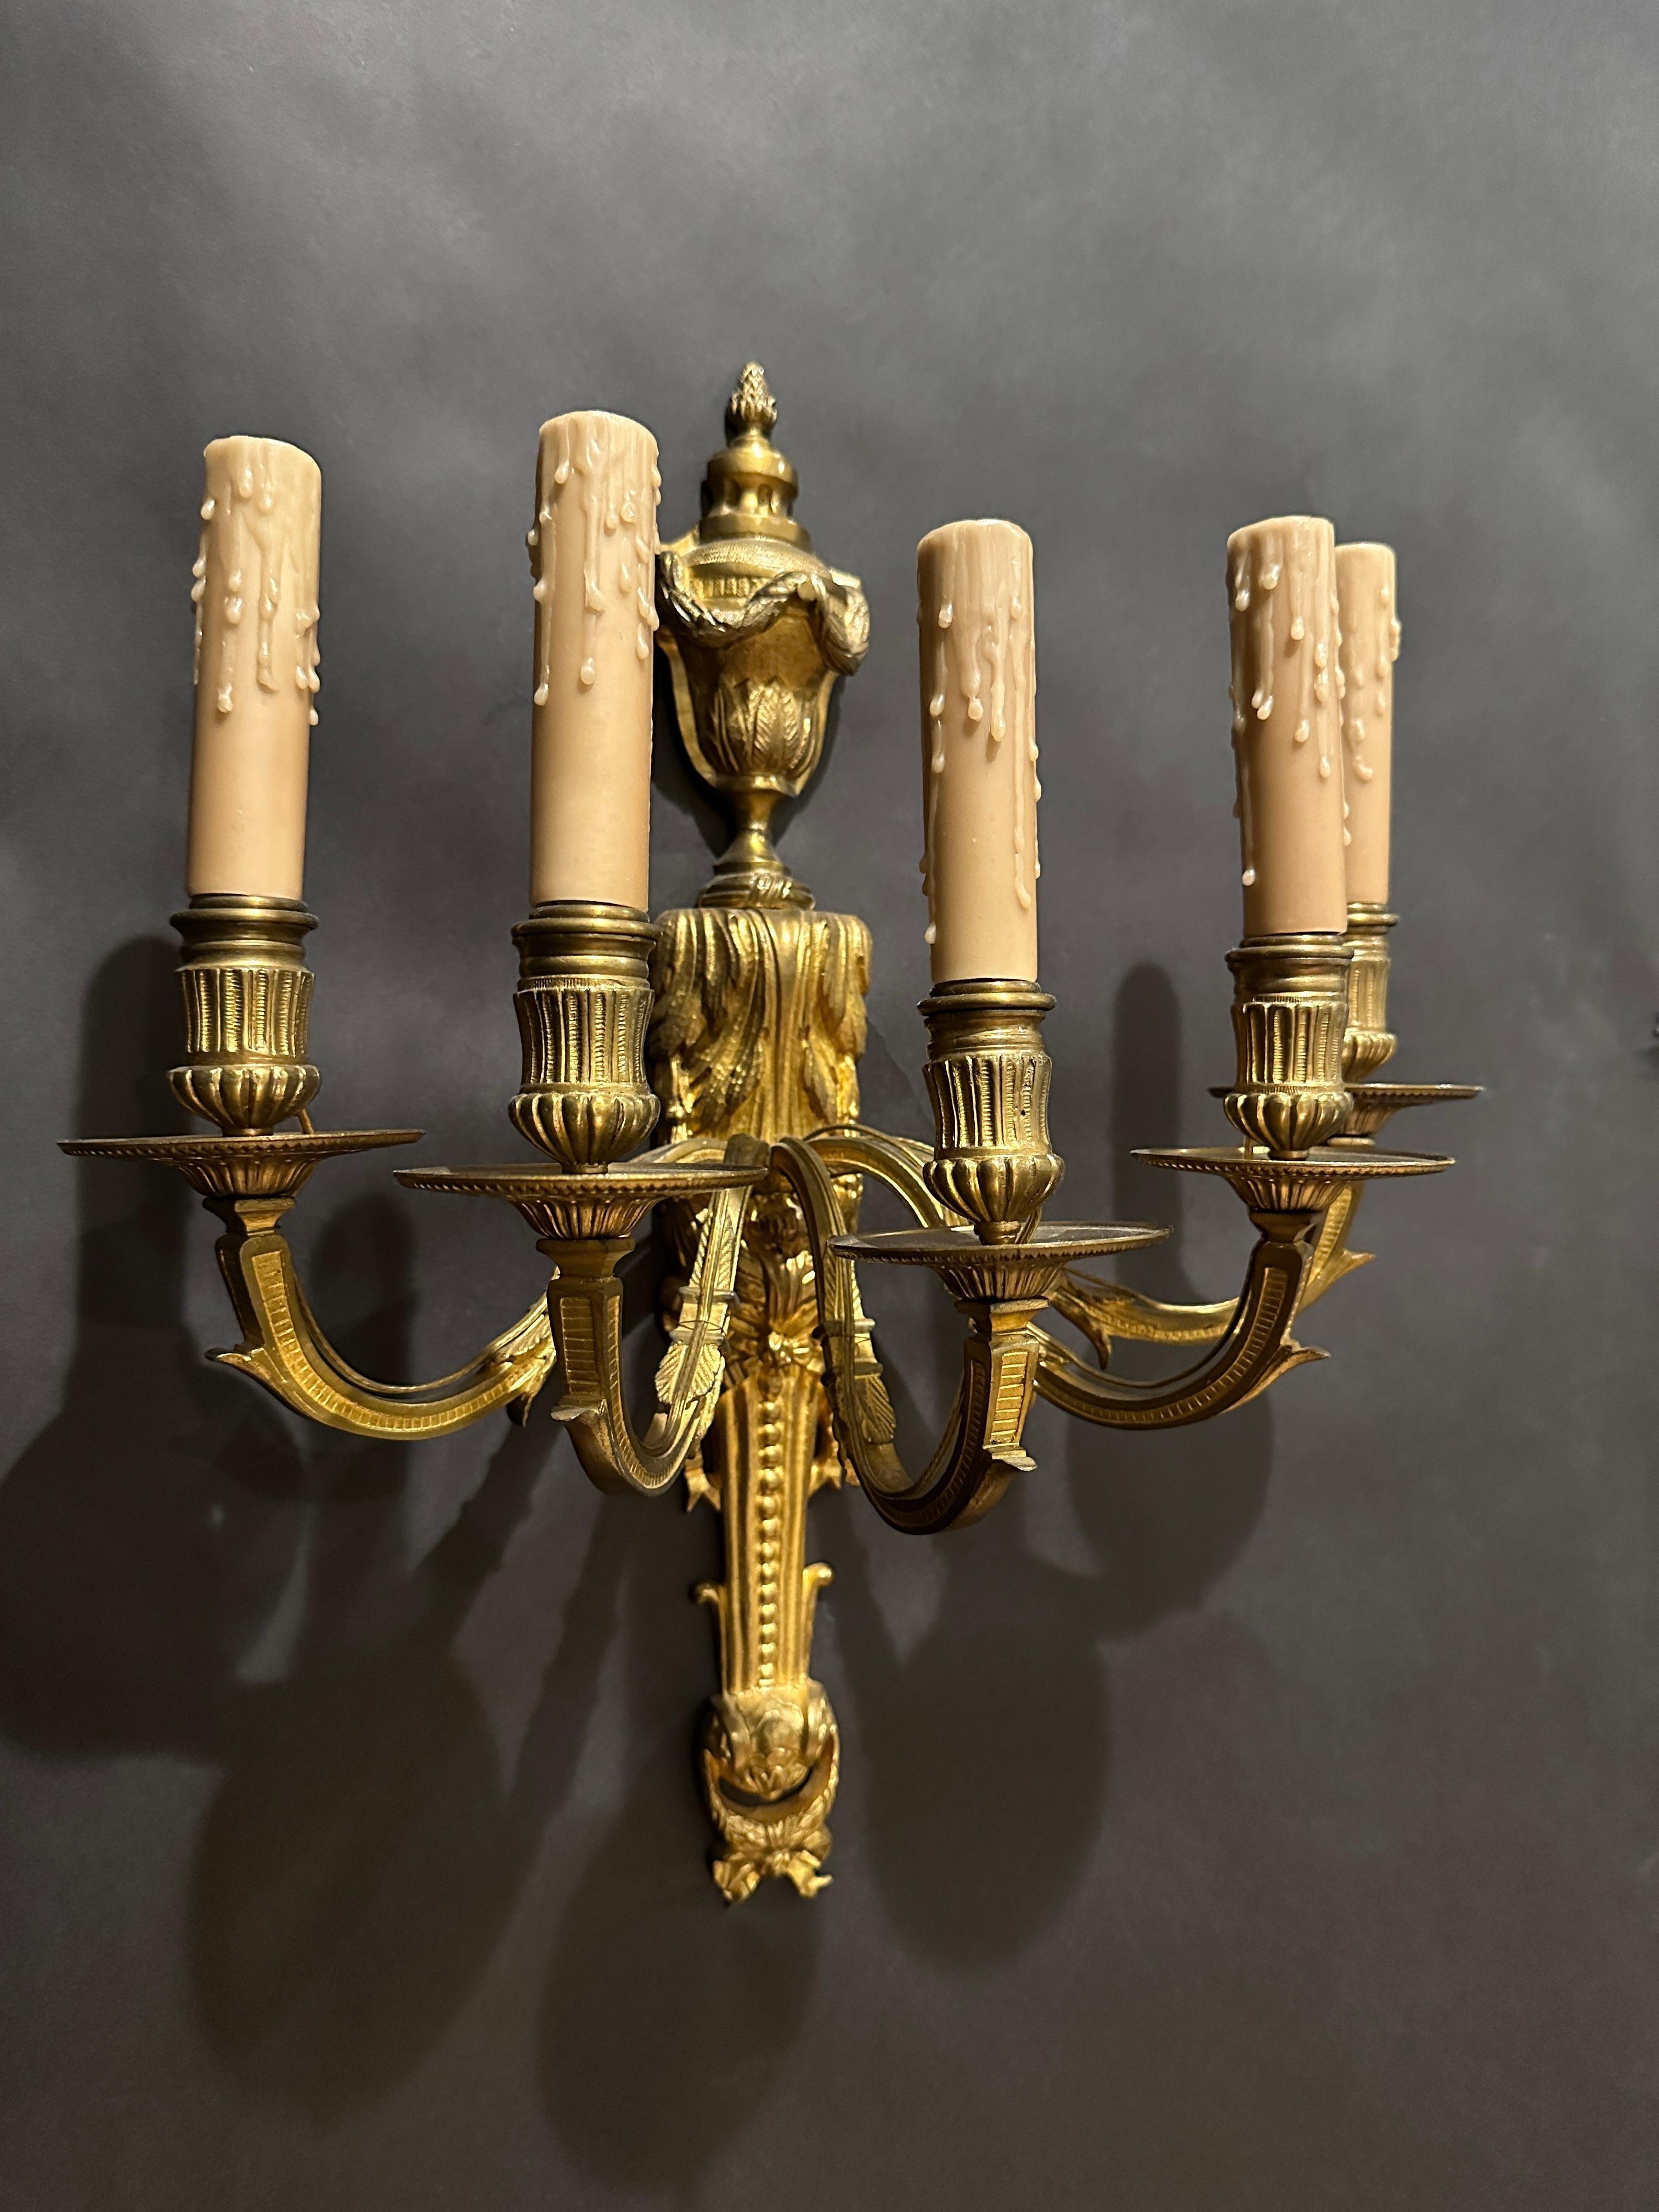 Pair Of 19th Century Gilt Bronze Louis XVI Wall Sconces In Good Condition For Sale In Norwood, NJ